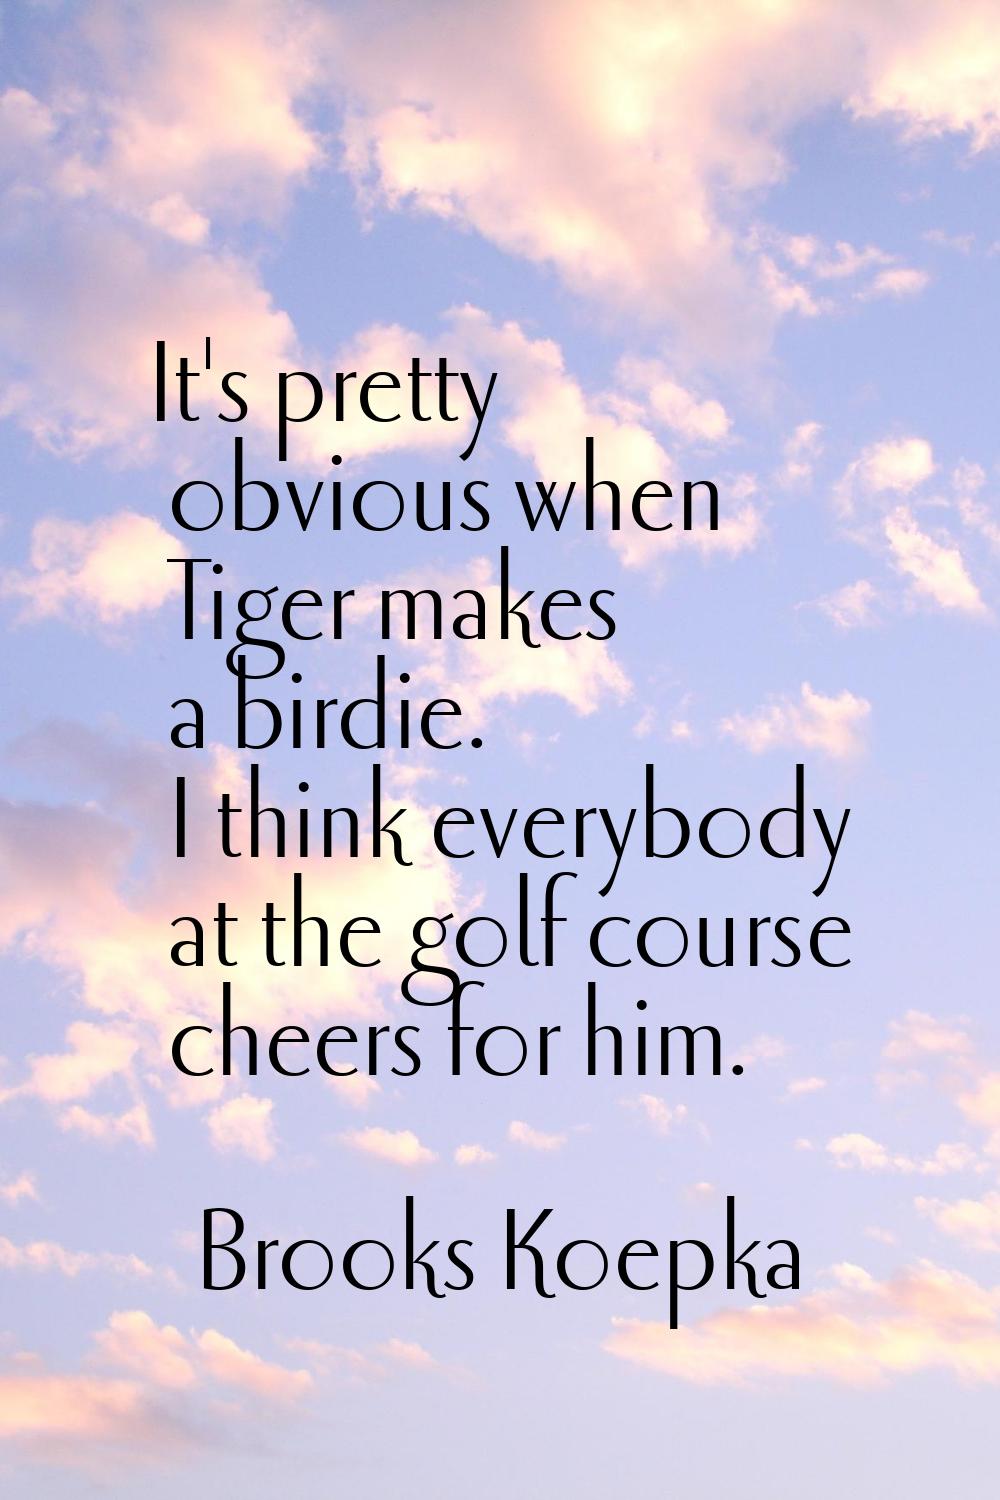 It's pretty obvious when Tiger makes a birdie. I think everybody at the golf course cheers for him.